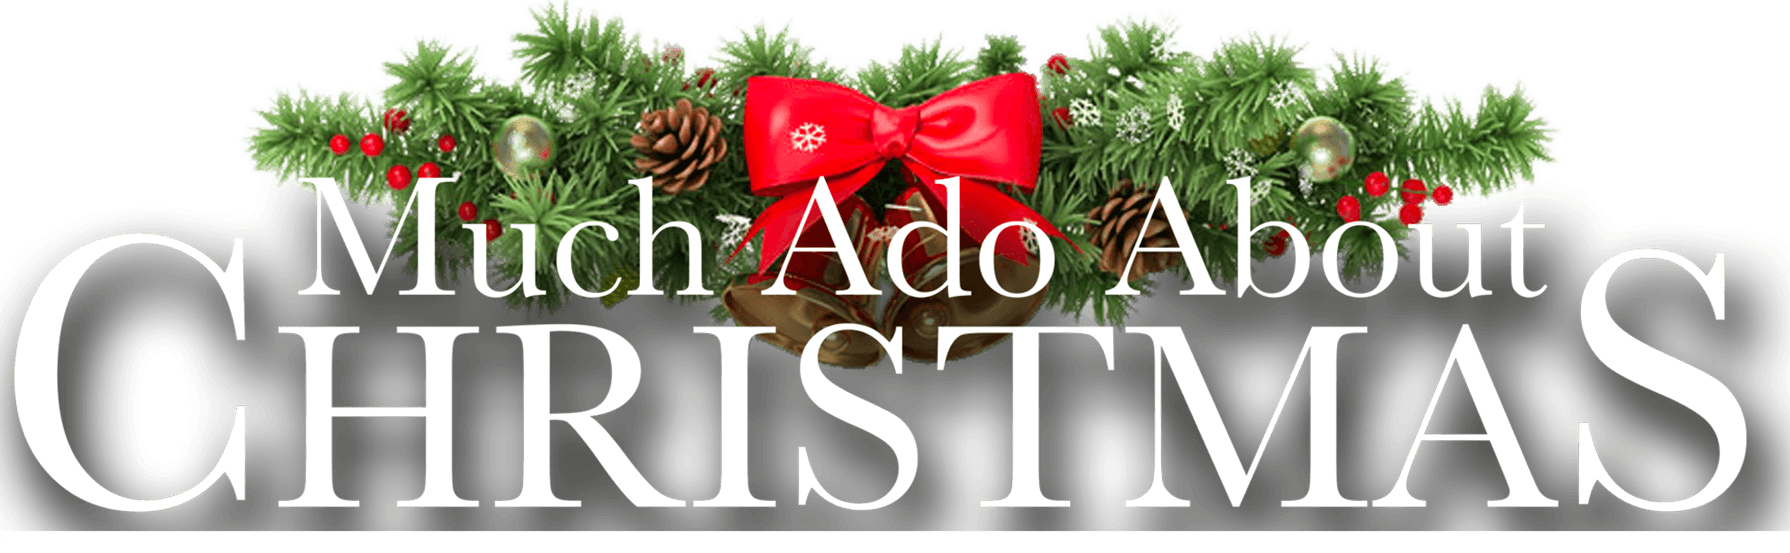 Much Ado About Christmas logo